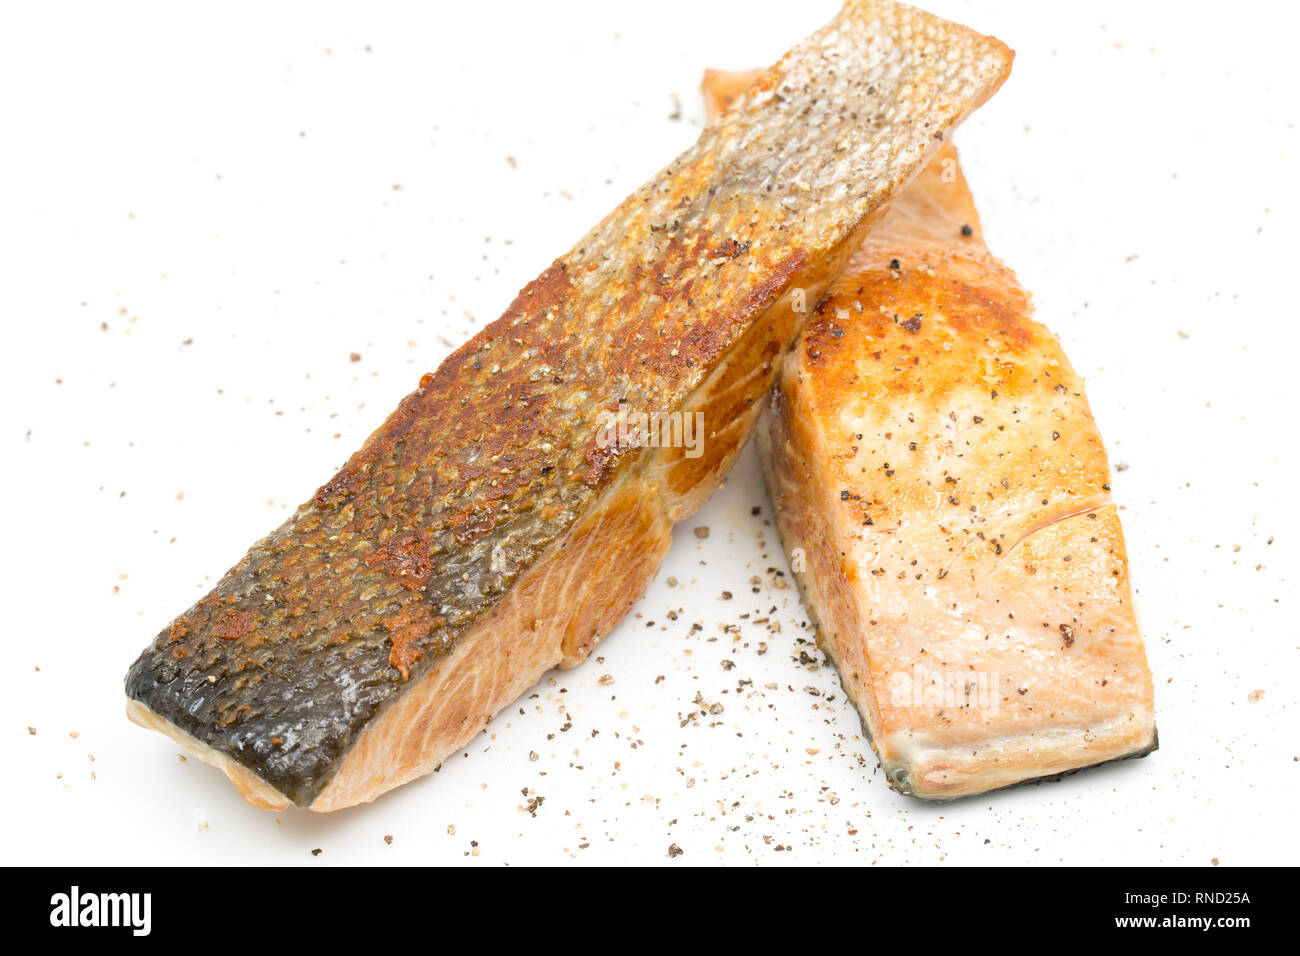 Two fried fillets of wild Keta salmon, Oncorhynchus keta, sprinkled with black pepper. Imported from the Pacific ocean and bought from a supermarket i Stock Photo